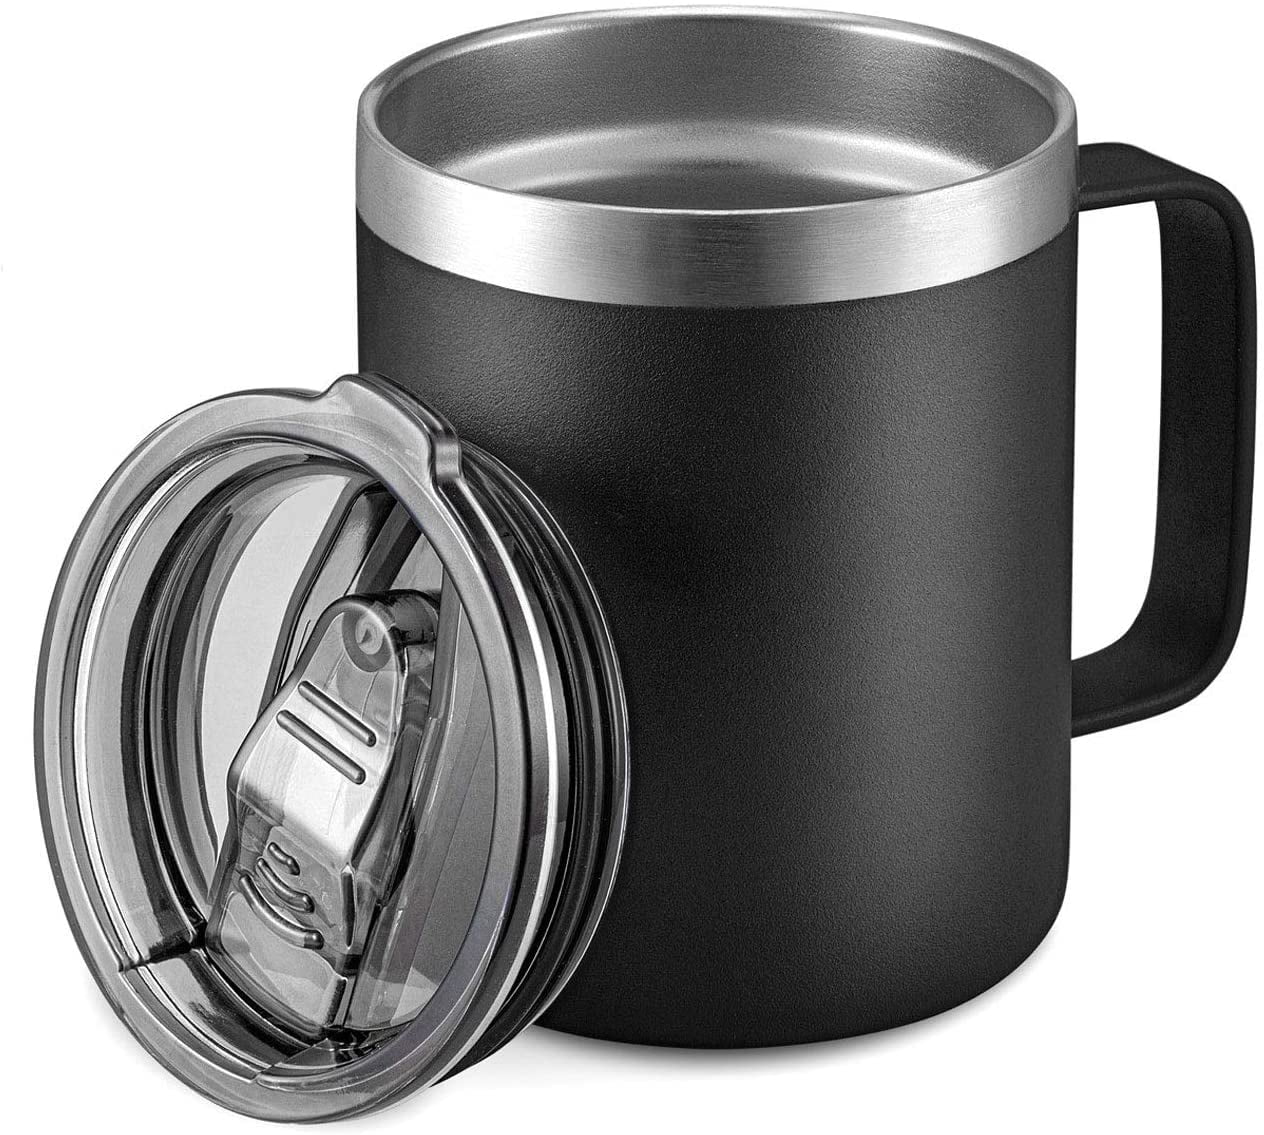 Shatterproof Camping Travel Outdoor Vacuum Durable Coffee Mug Stainless Steel Coffee Mugs with Lid Set of 2 Coffee to Go - 14 oz Double Walled Steel Coffee Glasses with Lid & Handle